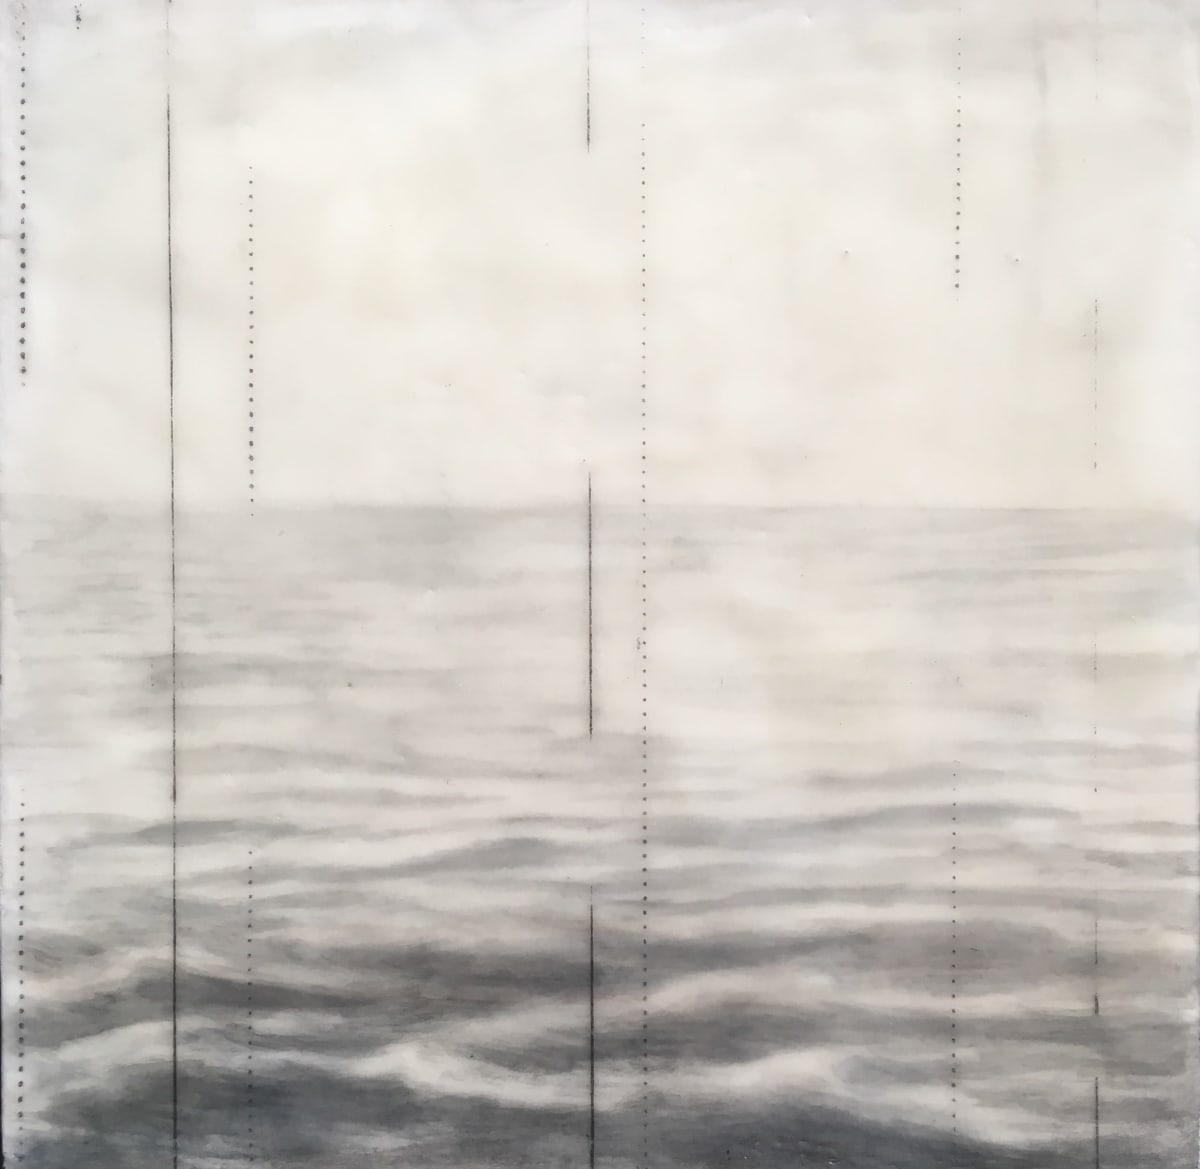 Chart Lines by Giselle Gautreau  Image: Chart Lines
Encaustic, graphite on panel
8x8"